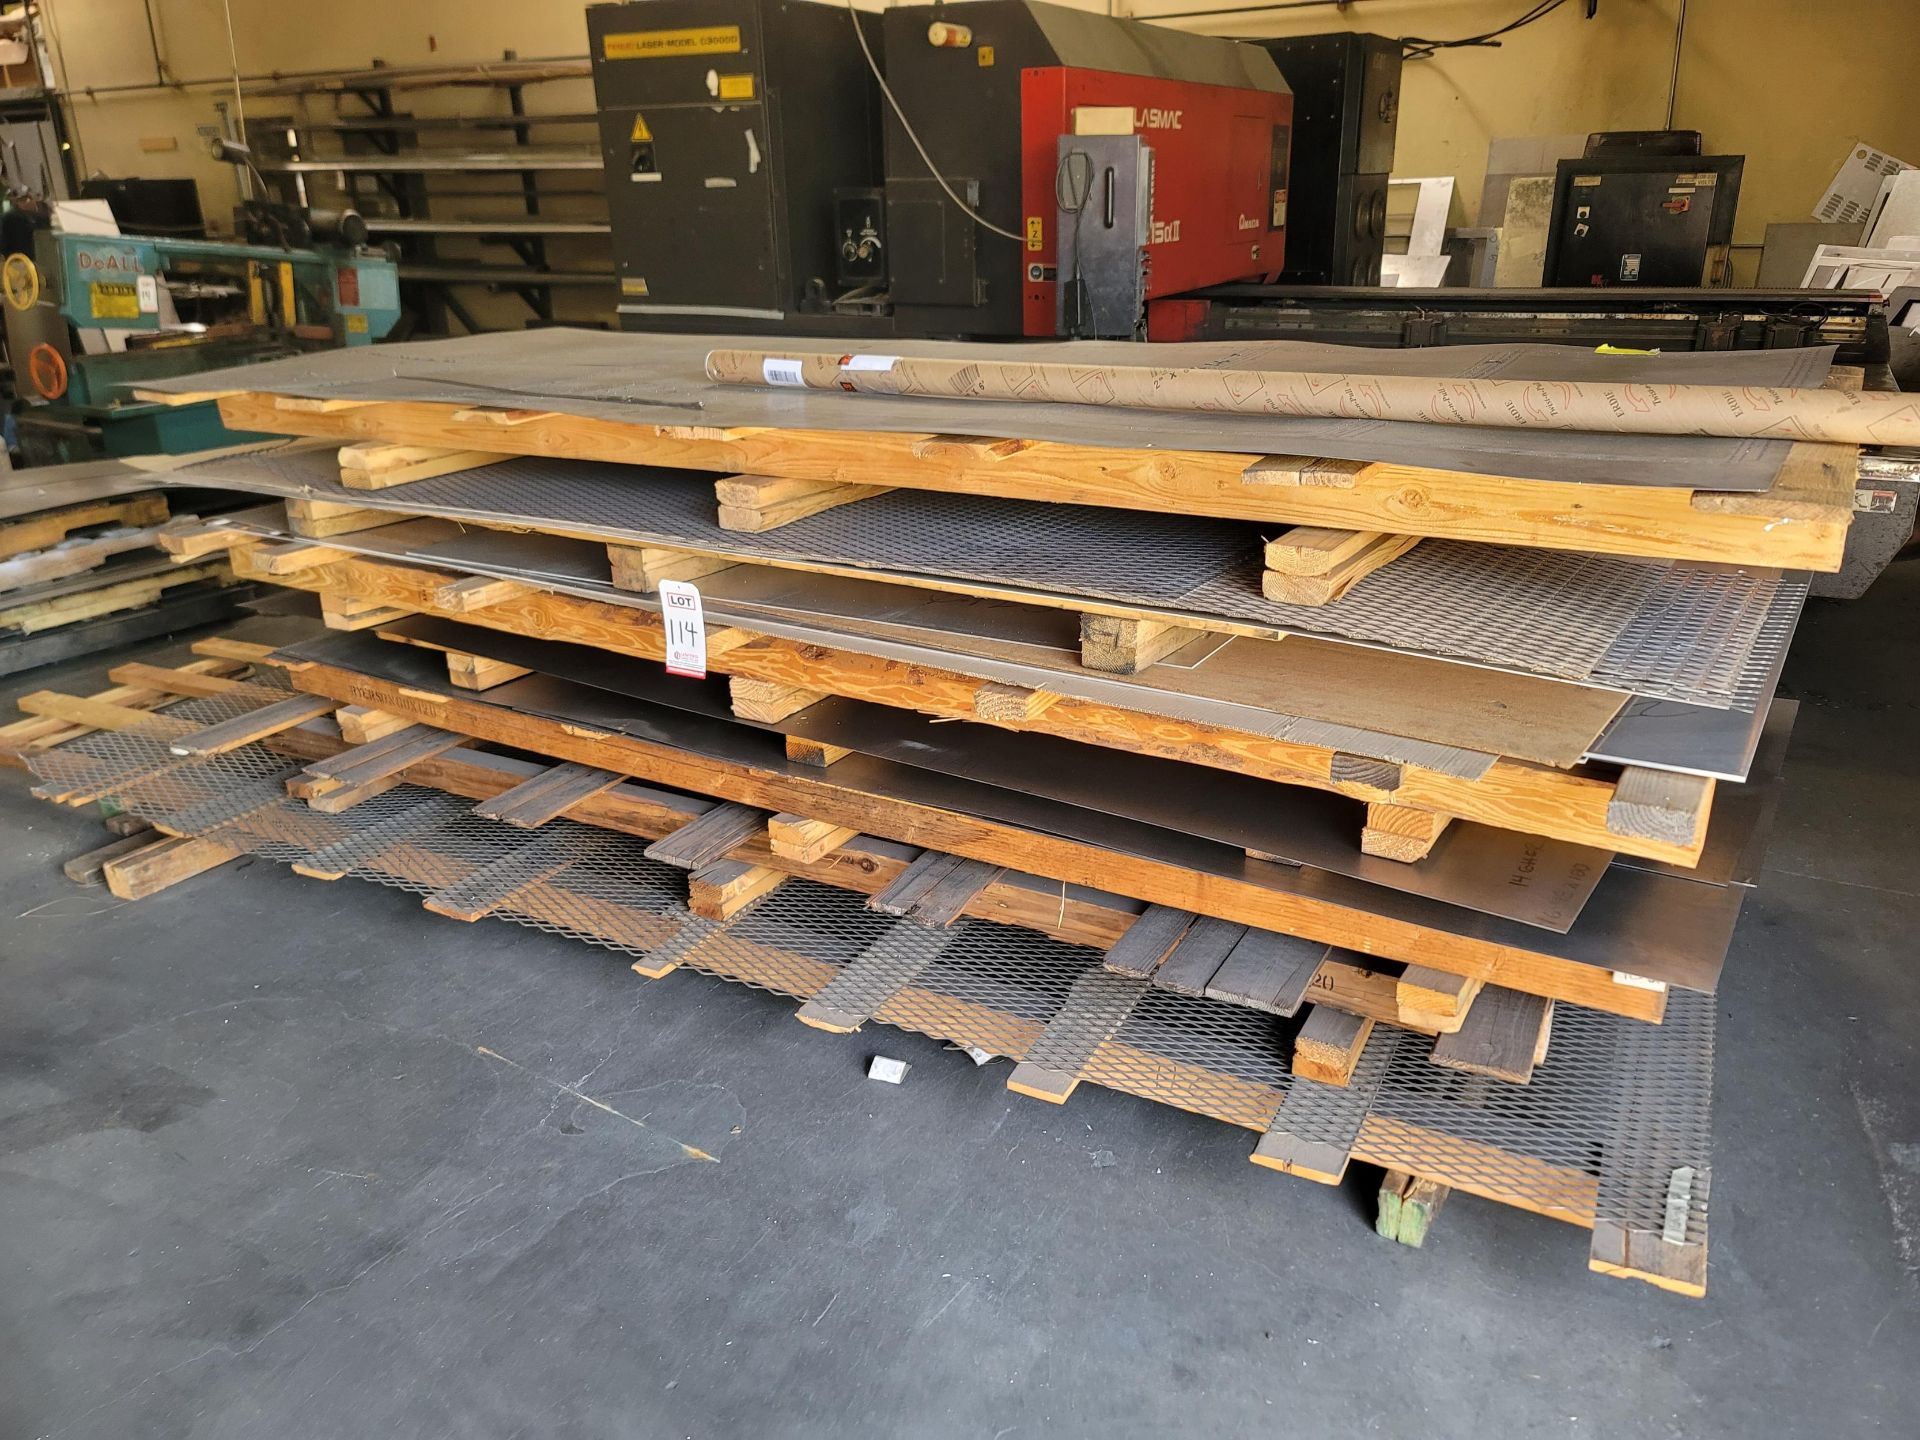 LOT - PALLETS OF SHEET MATERIAL: (5) PALLETS OF ASSORTED ALUMINUM, STEEL AND EXPANDED STEEL MESH